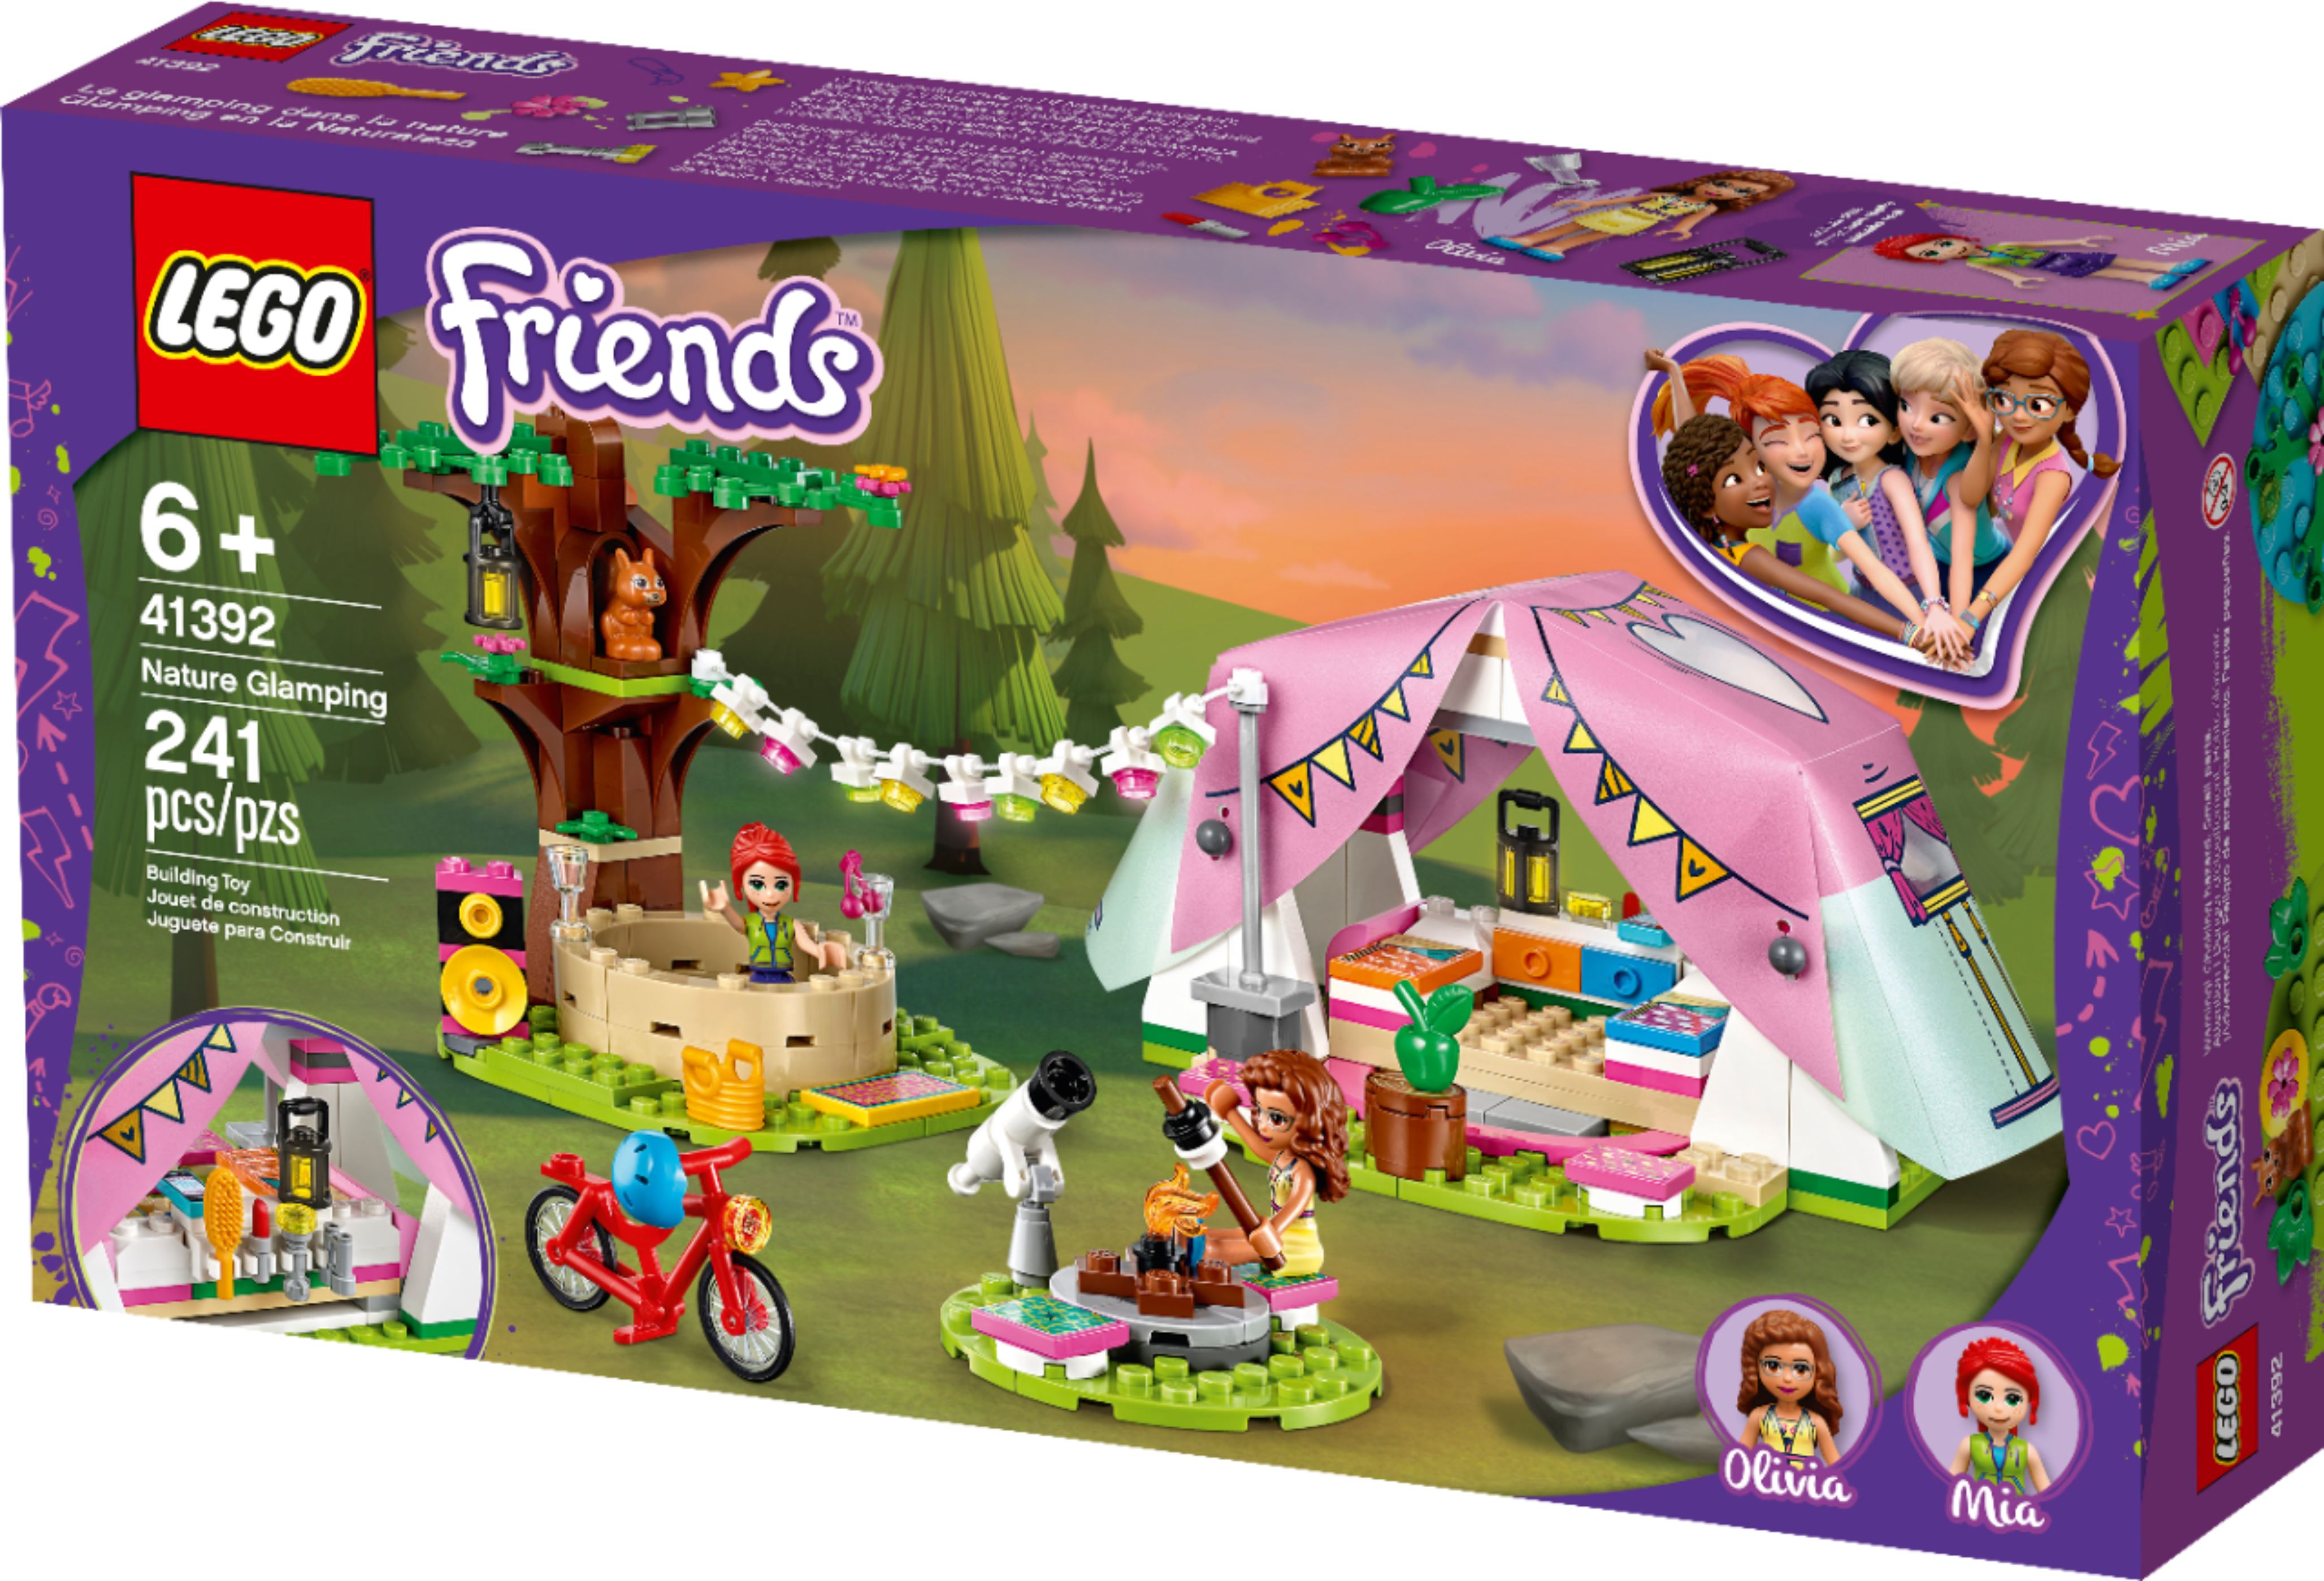 for sale online LEGO Nature Glamping LEGO Friends 41392 